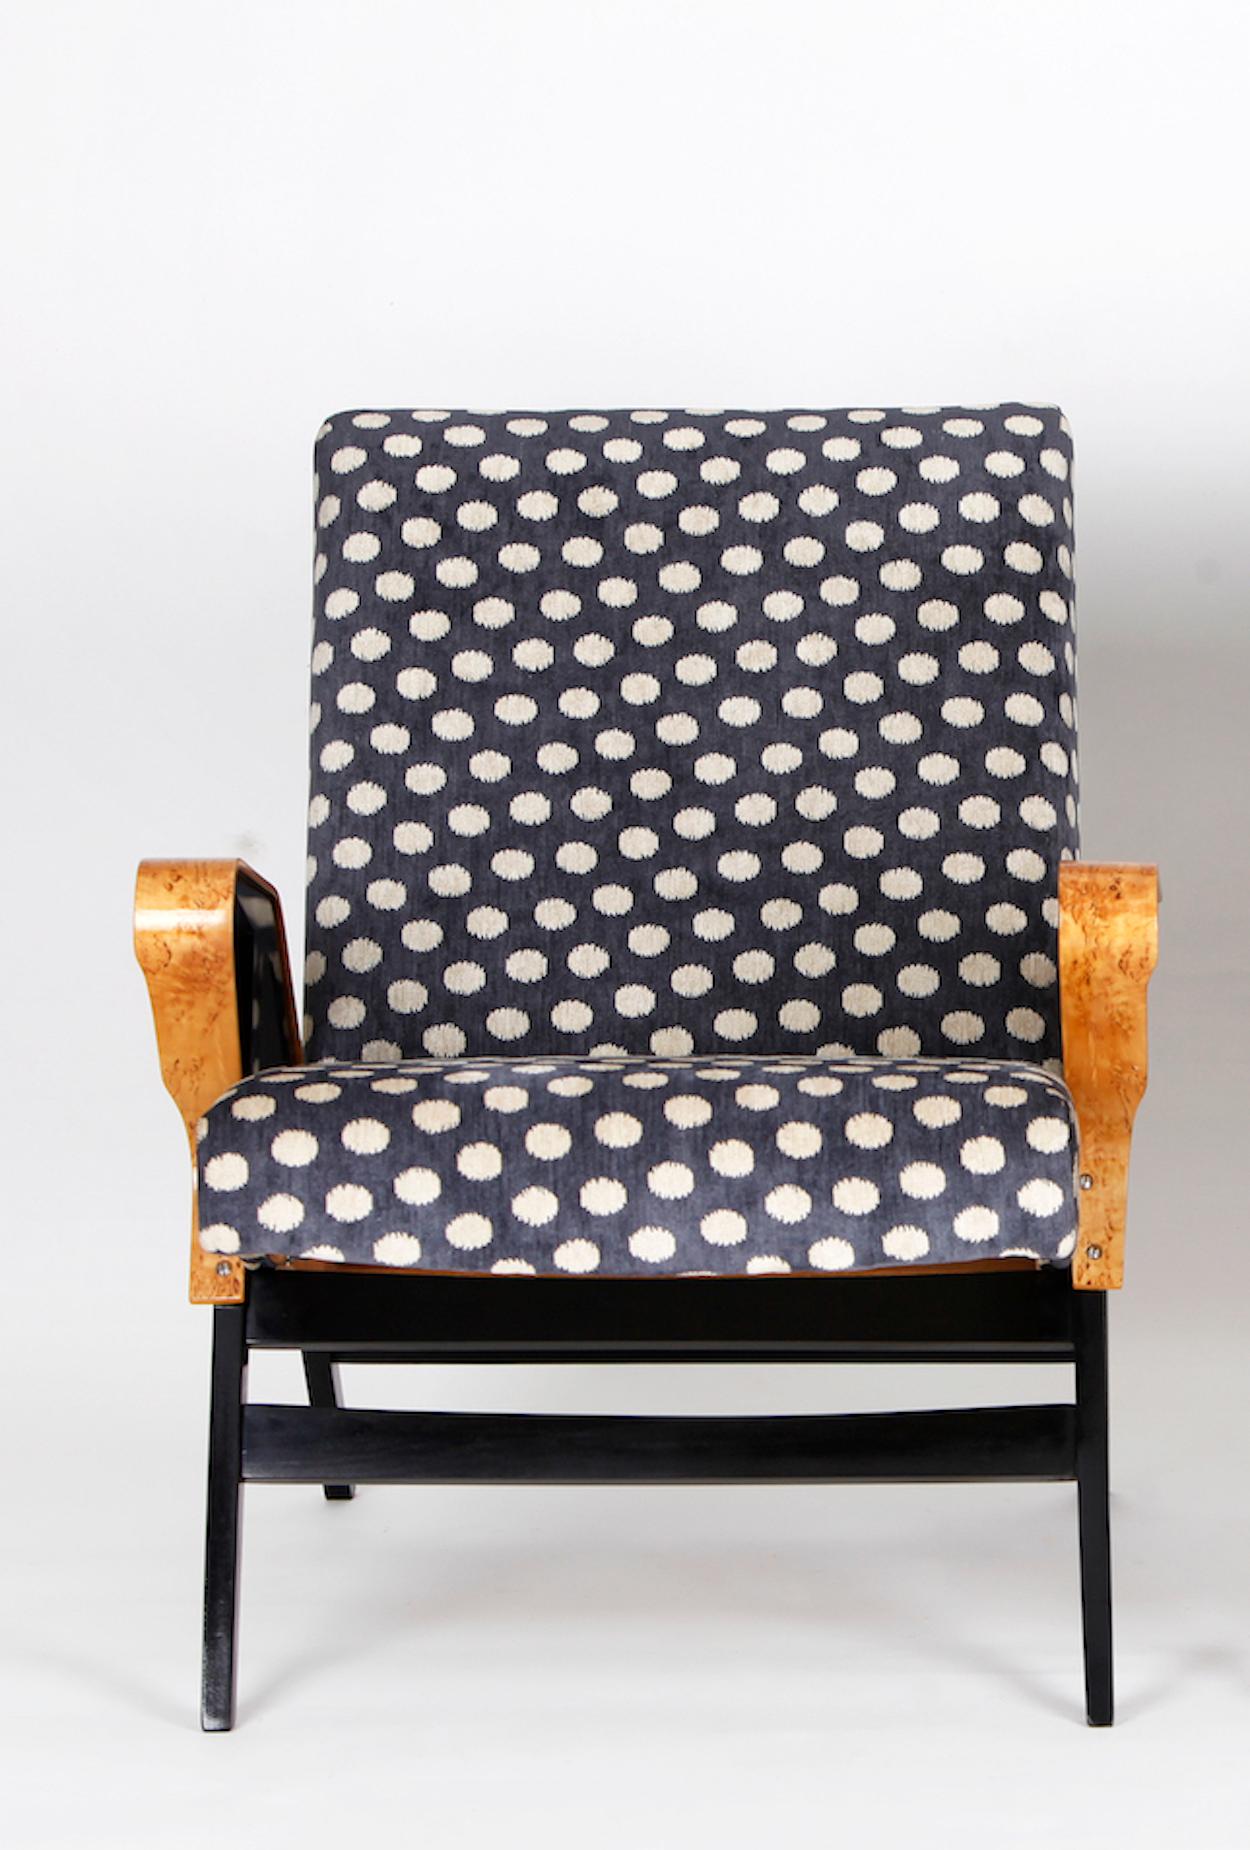 This lounge chair was produced in the 1960s by the Czechoslovak company Tatra Pravenec. It is completely restored, with new upholstery and restored wooden parts. She has a new upholstery in English fabric from Colefax and Fowler.